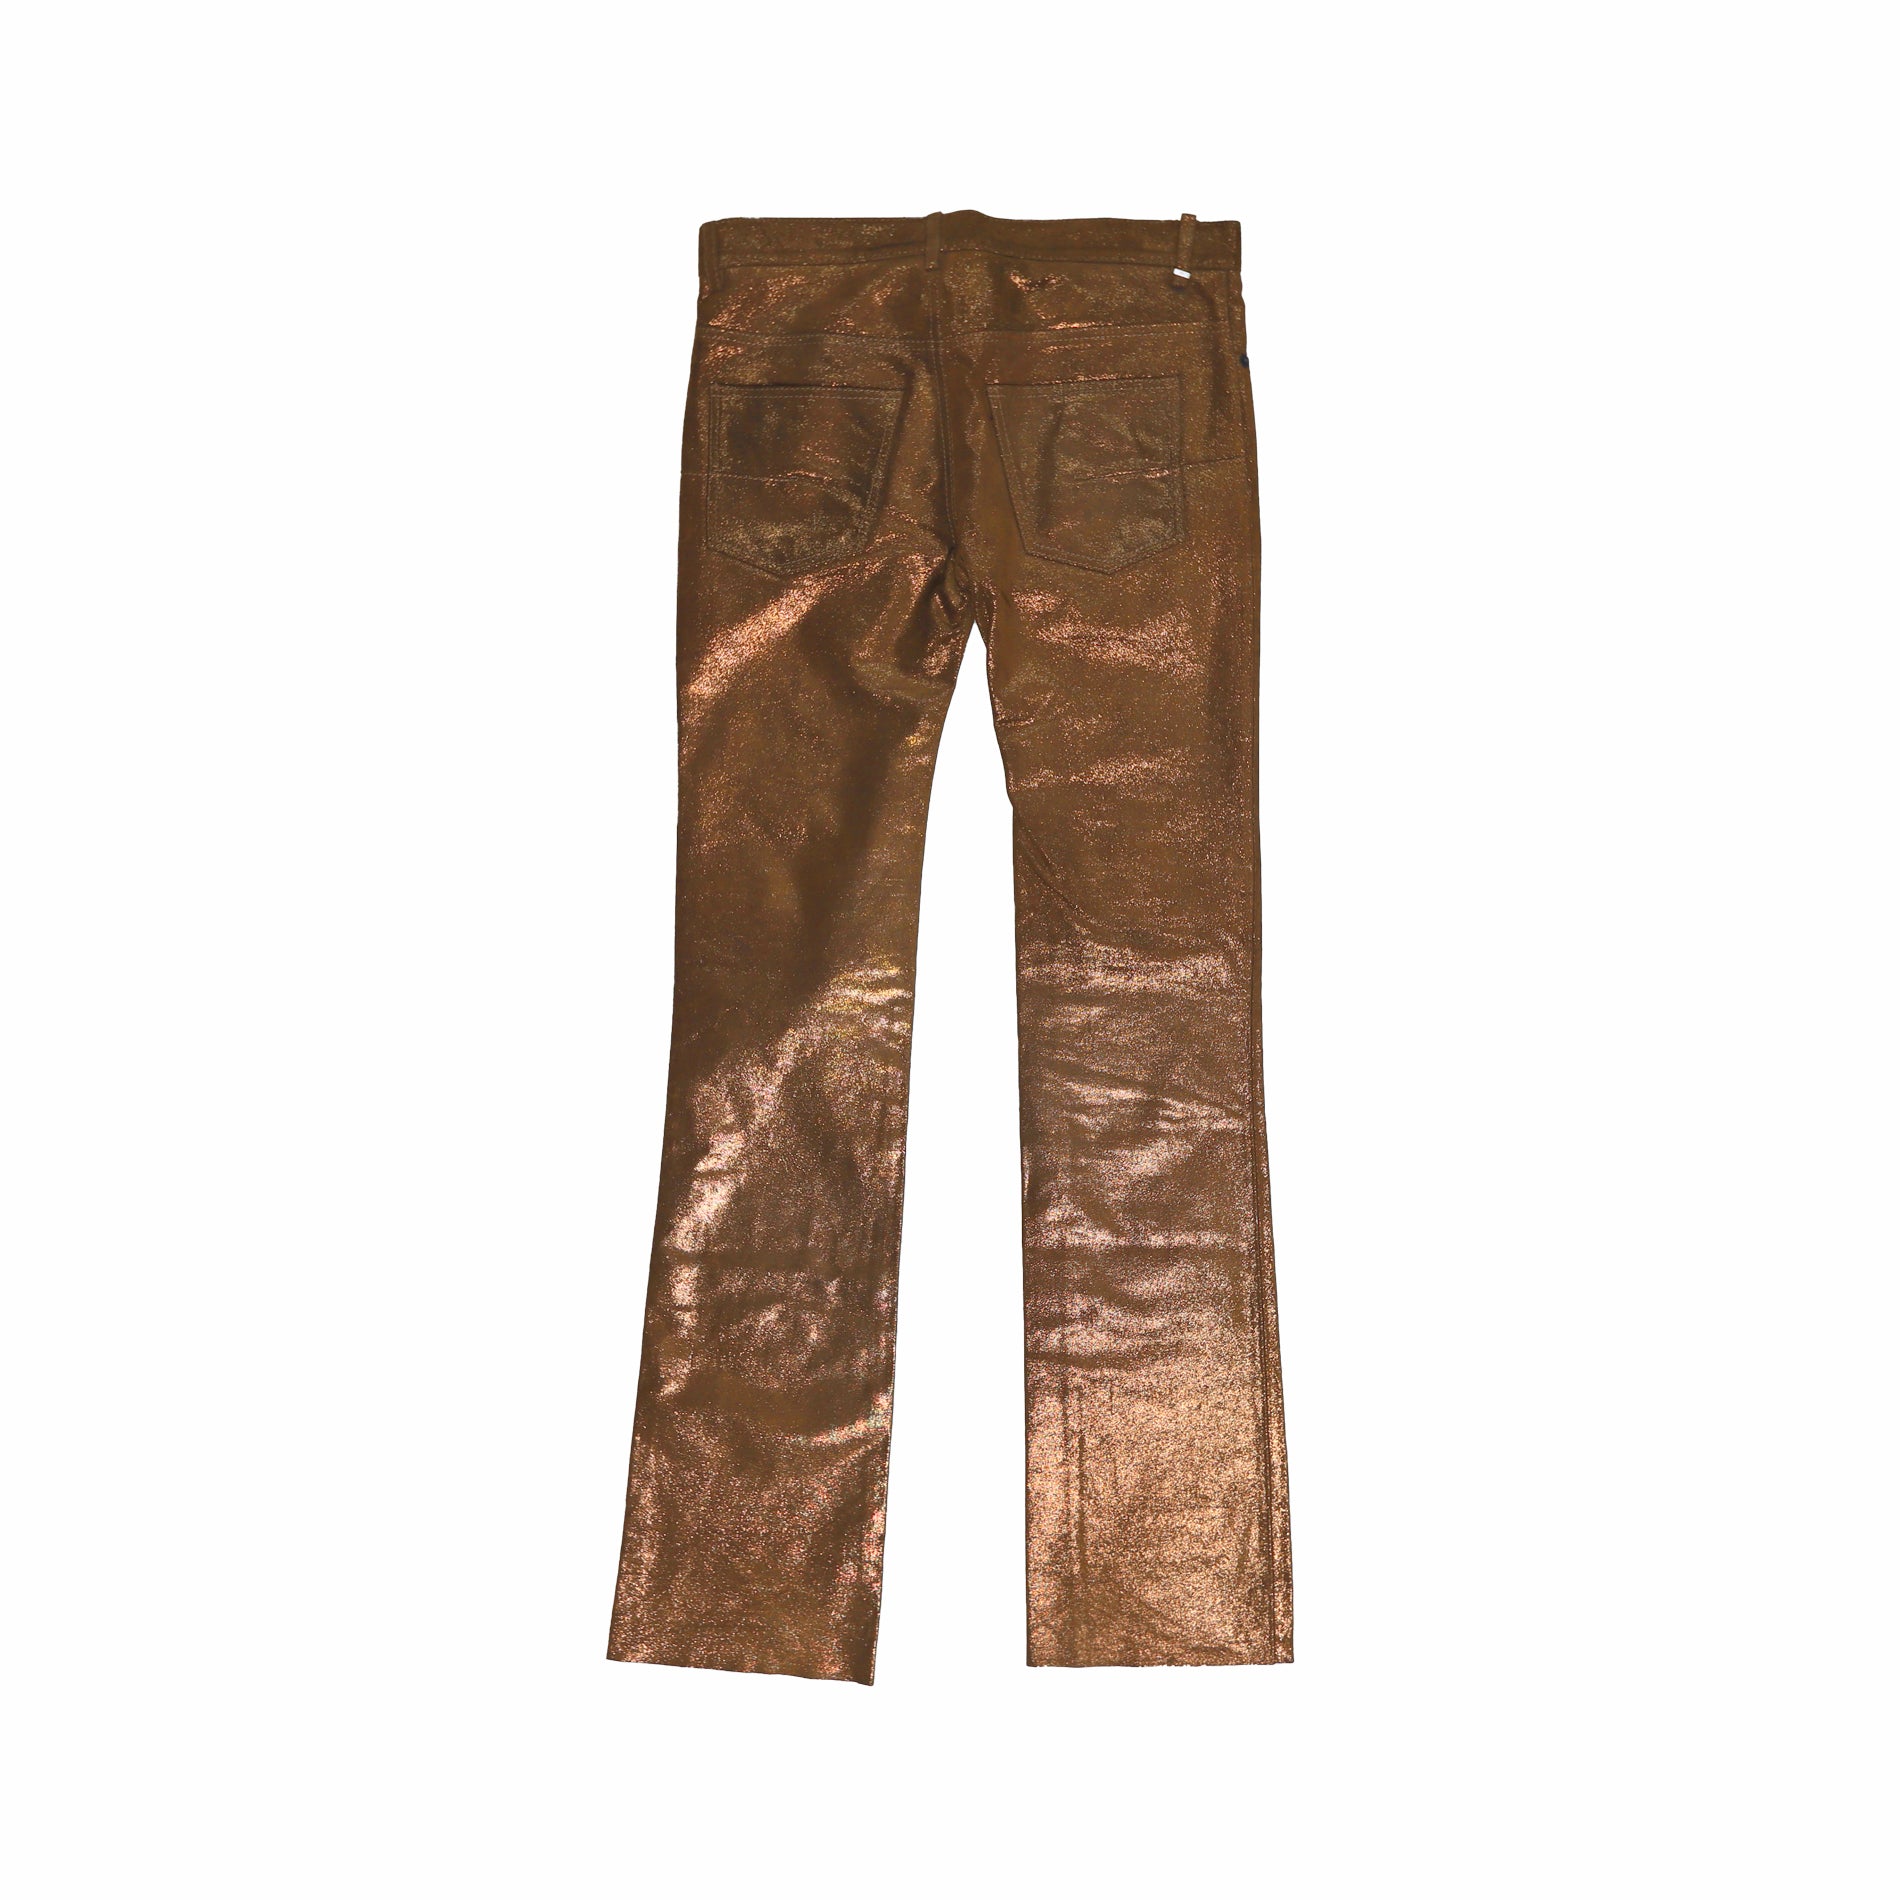 Dior Homme AW05 "In The Morning" Gold Glitter Leather Pants